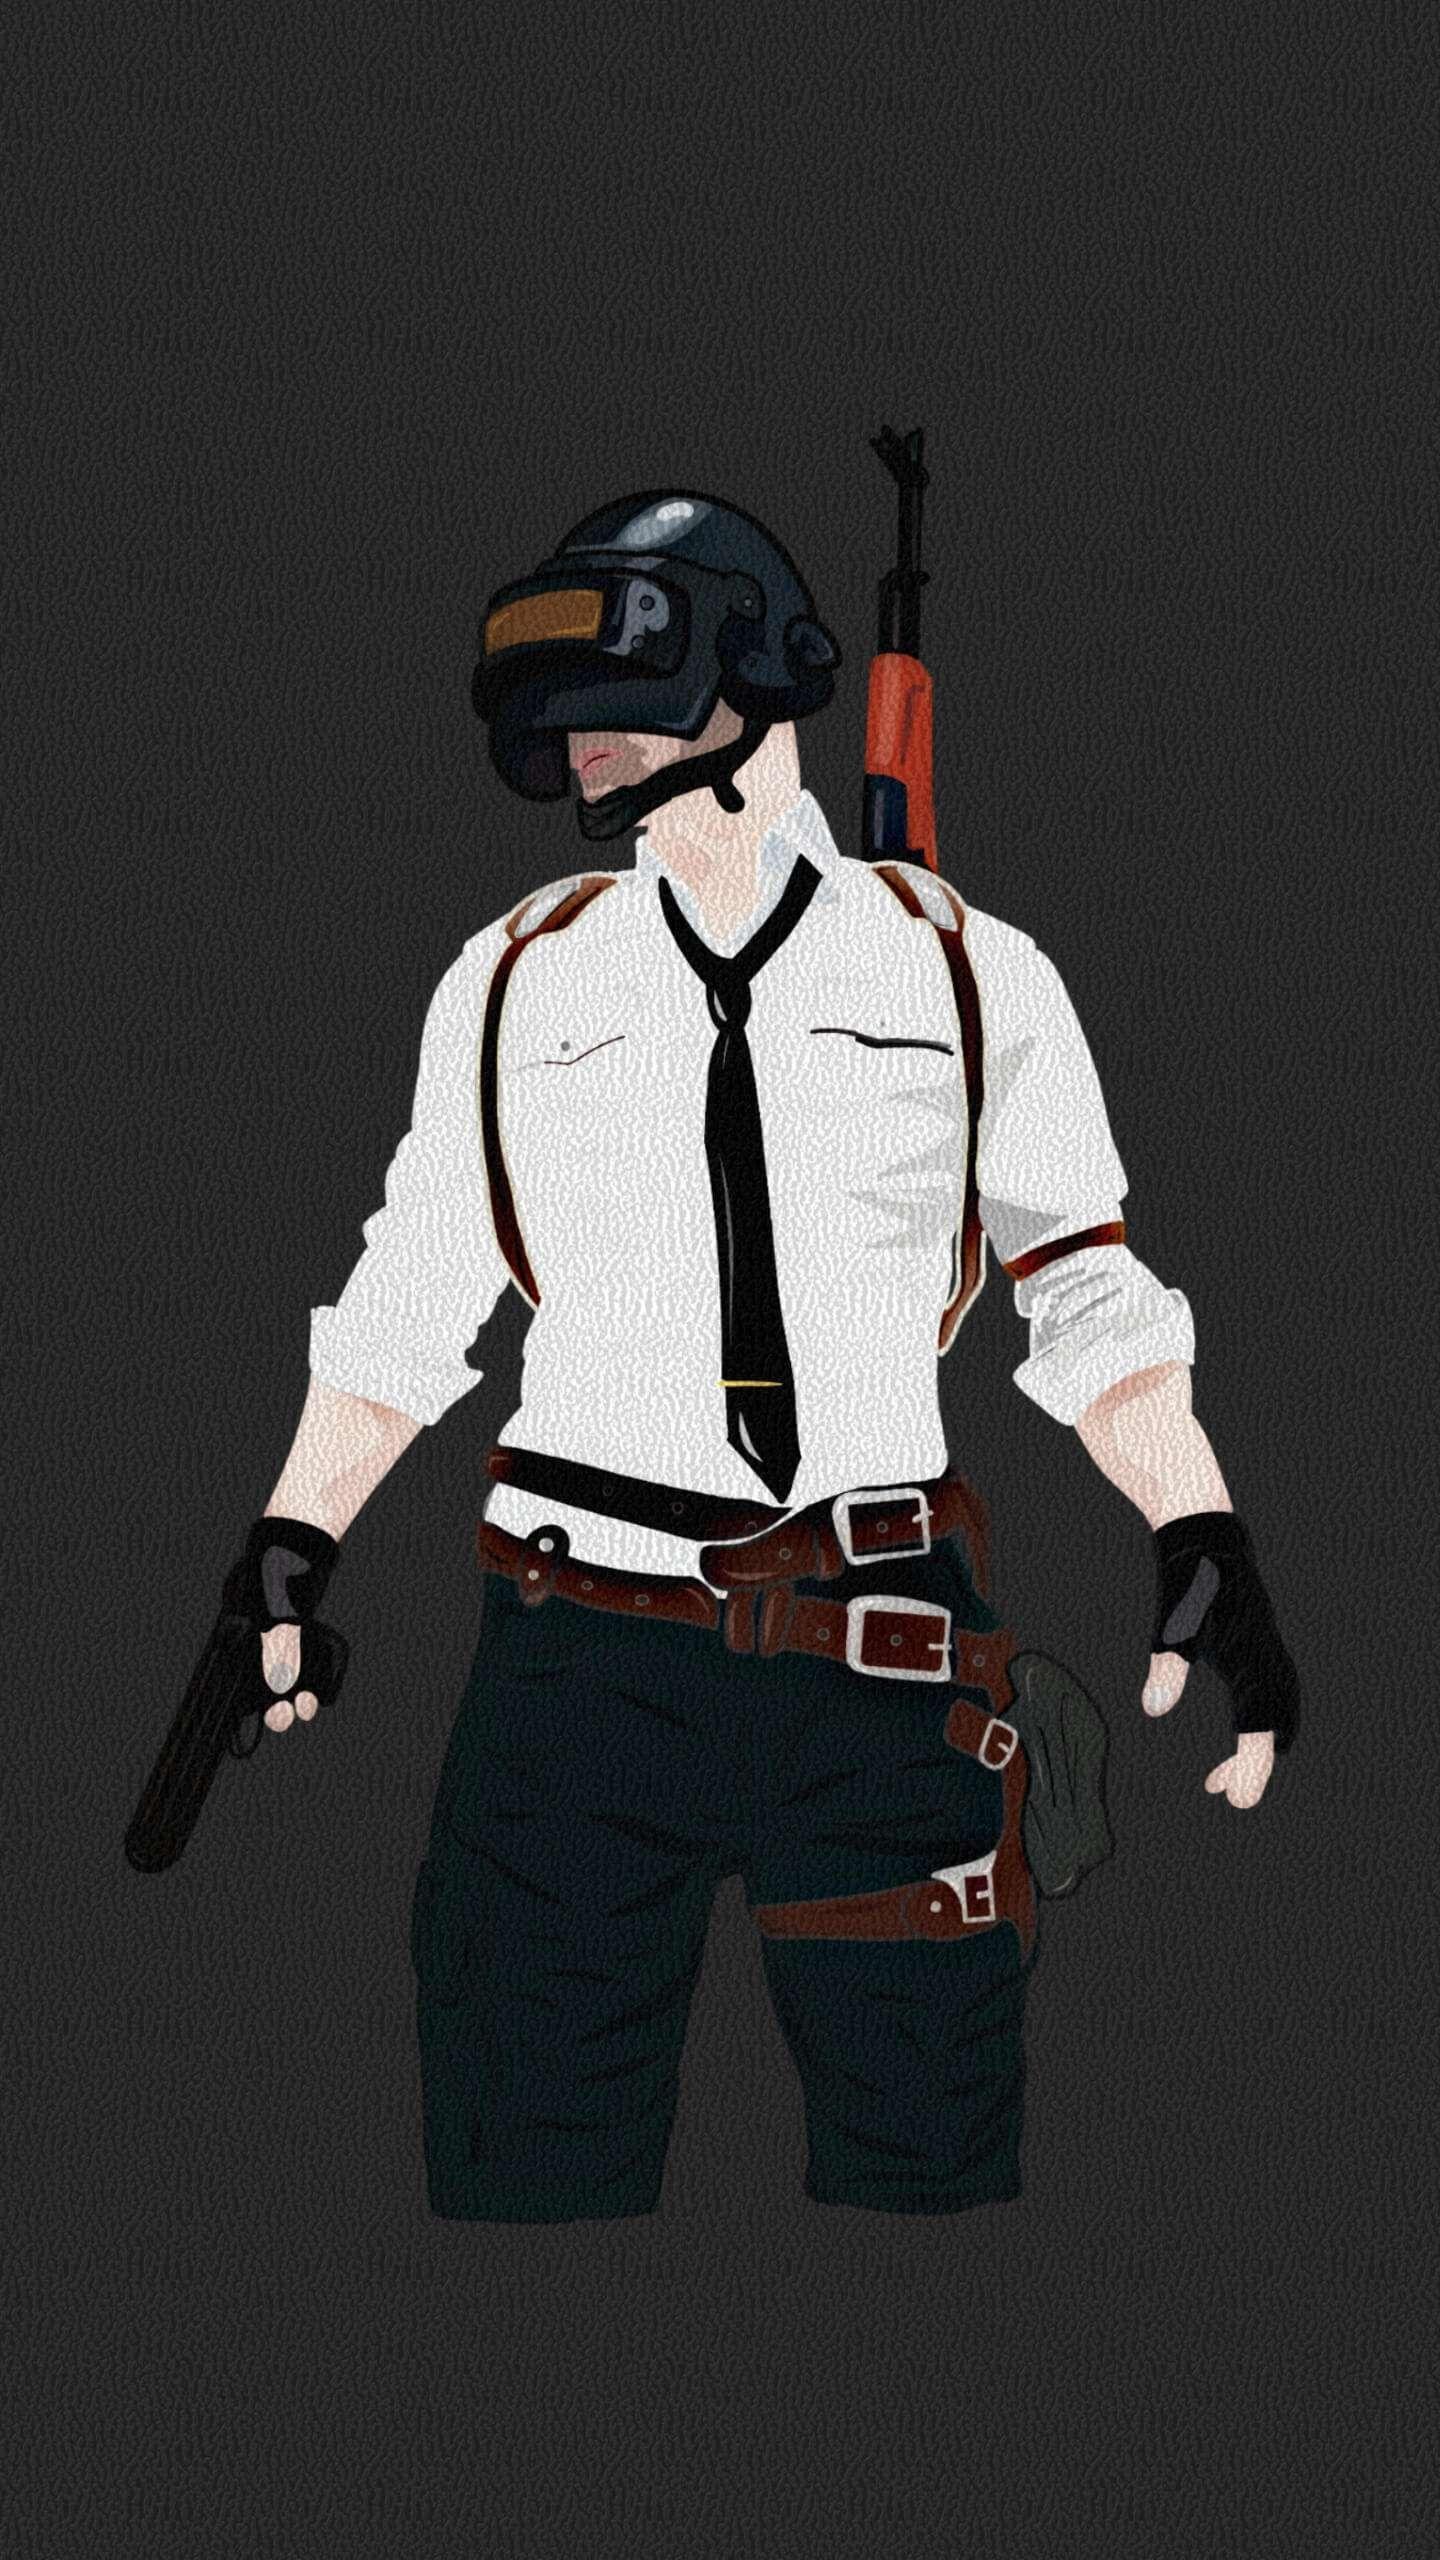 PUBG Level 3 iPhone Wallpaper. Android phone wallpaper, Game wallpaper iphone, Mobile wallpaper android